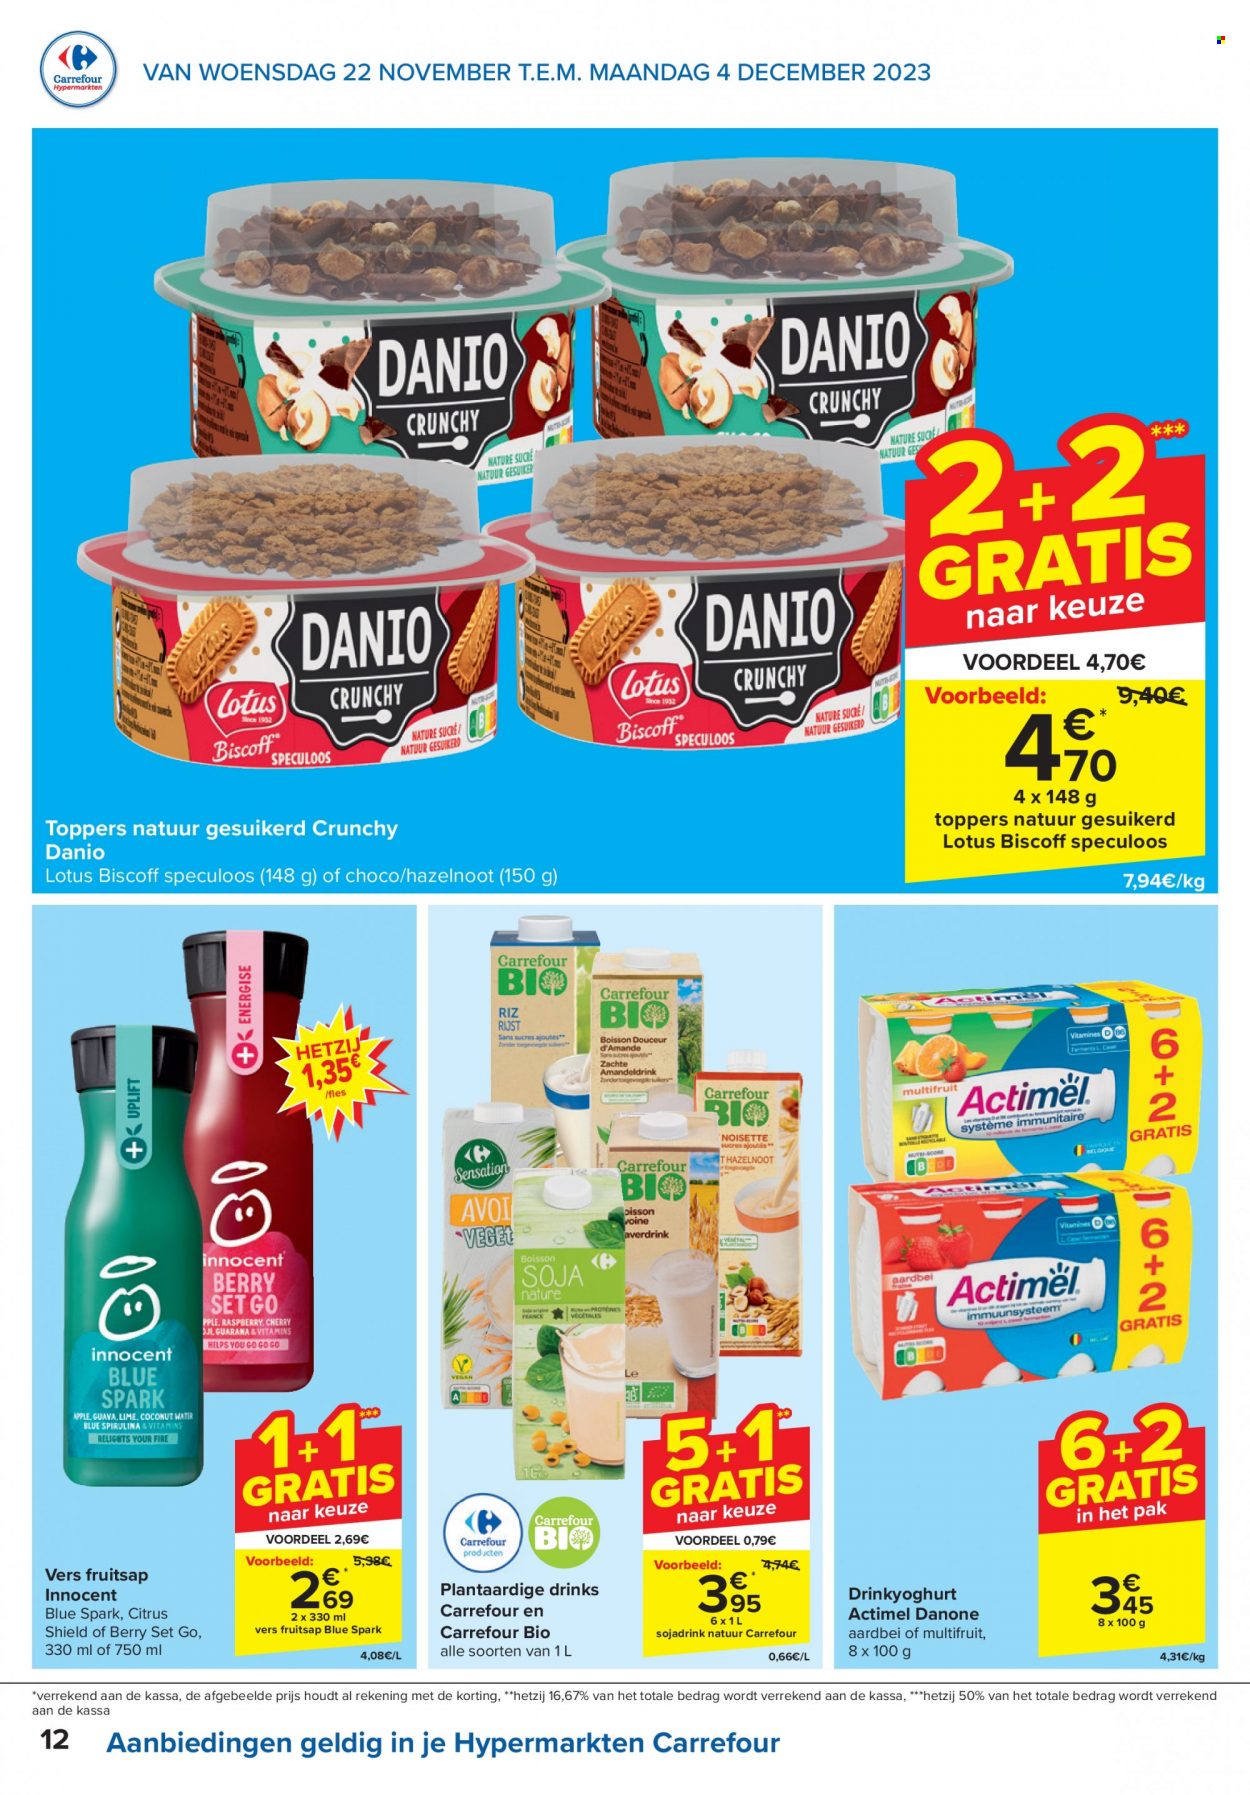 Catalogue Carrefour hypermarkt - 22.11.2023 - 4.12.2023. Page 12.